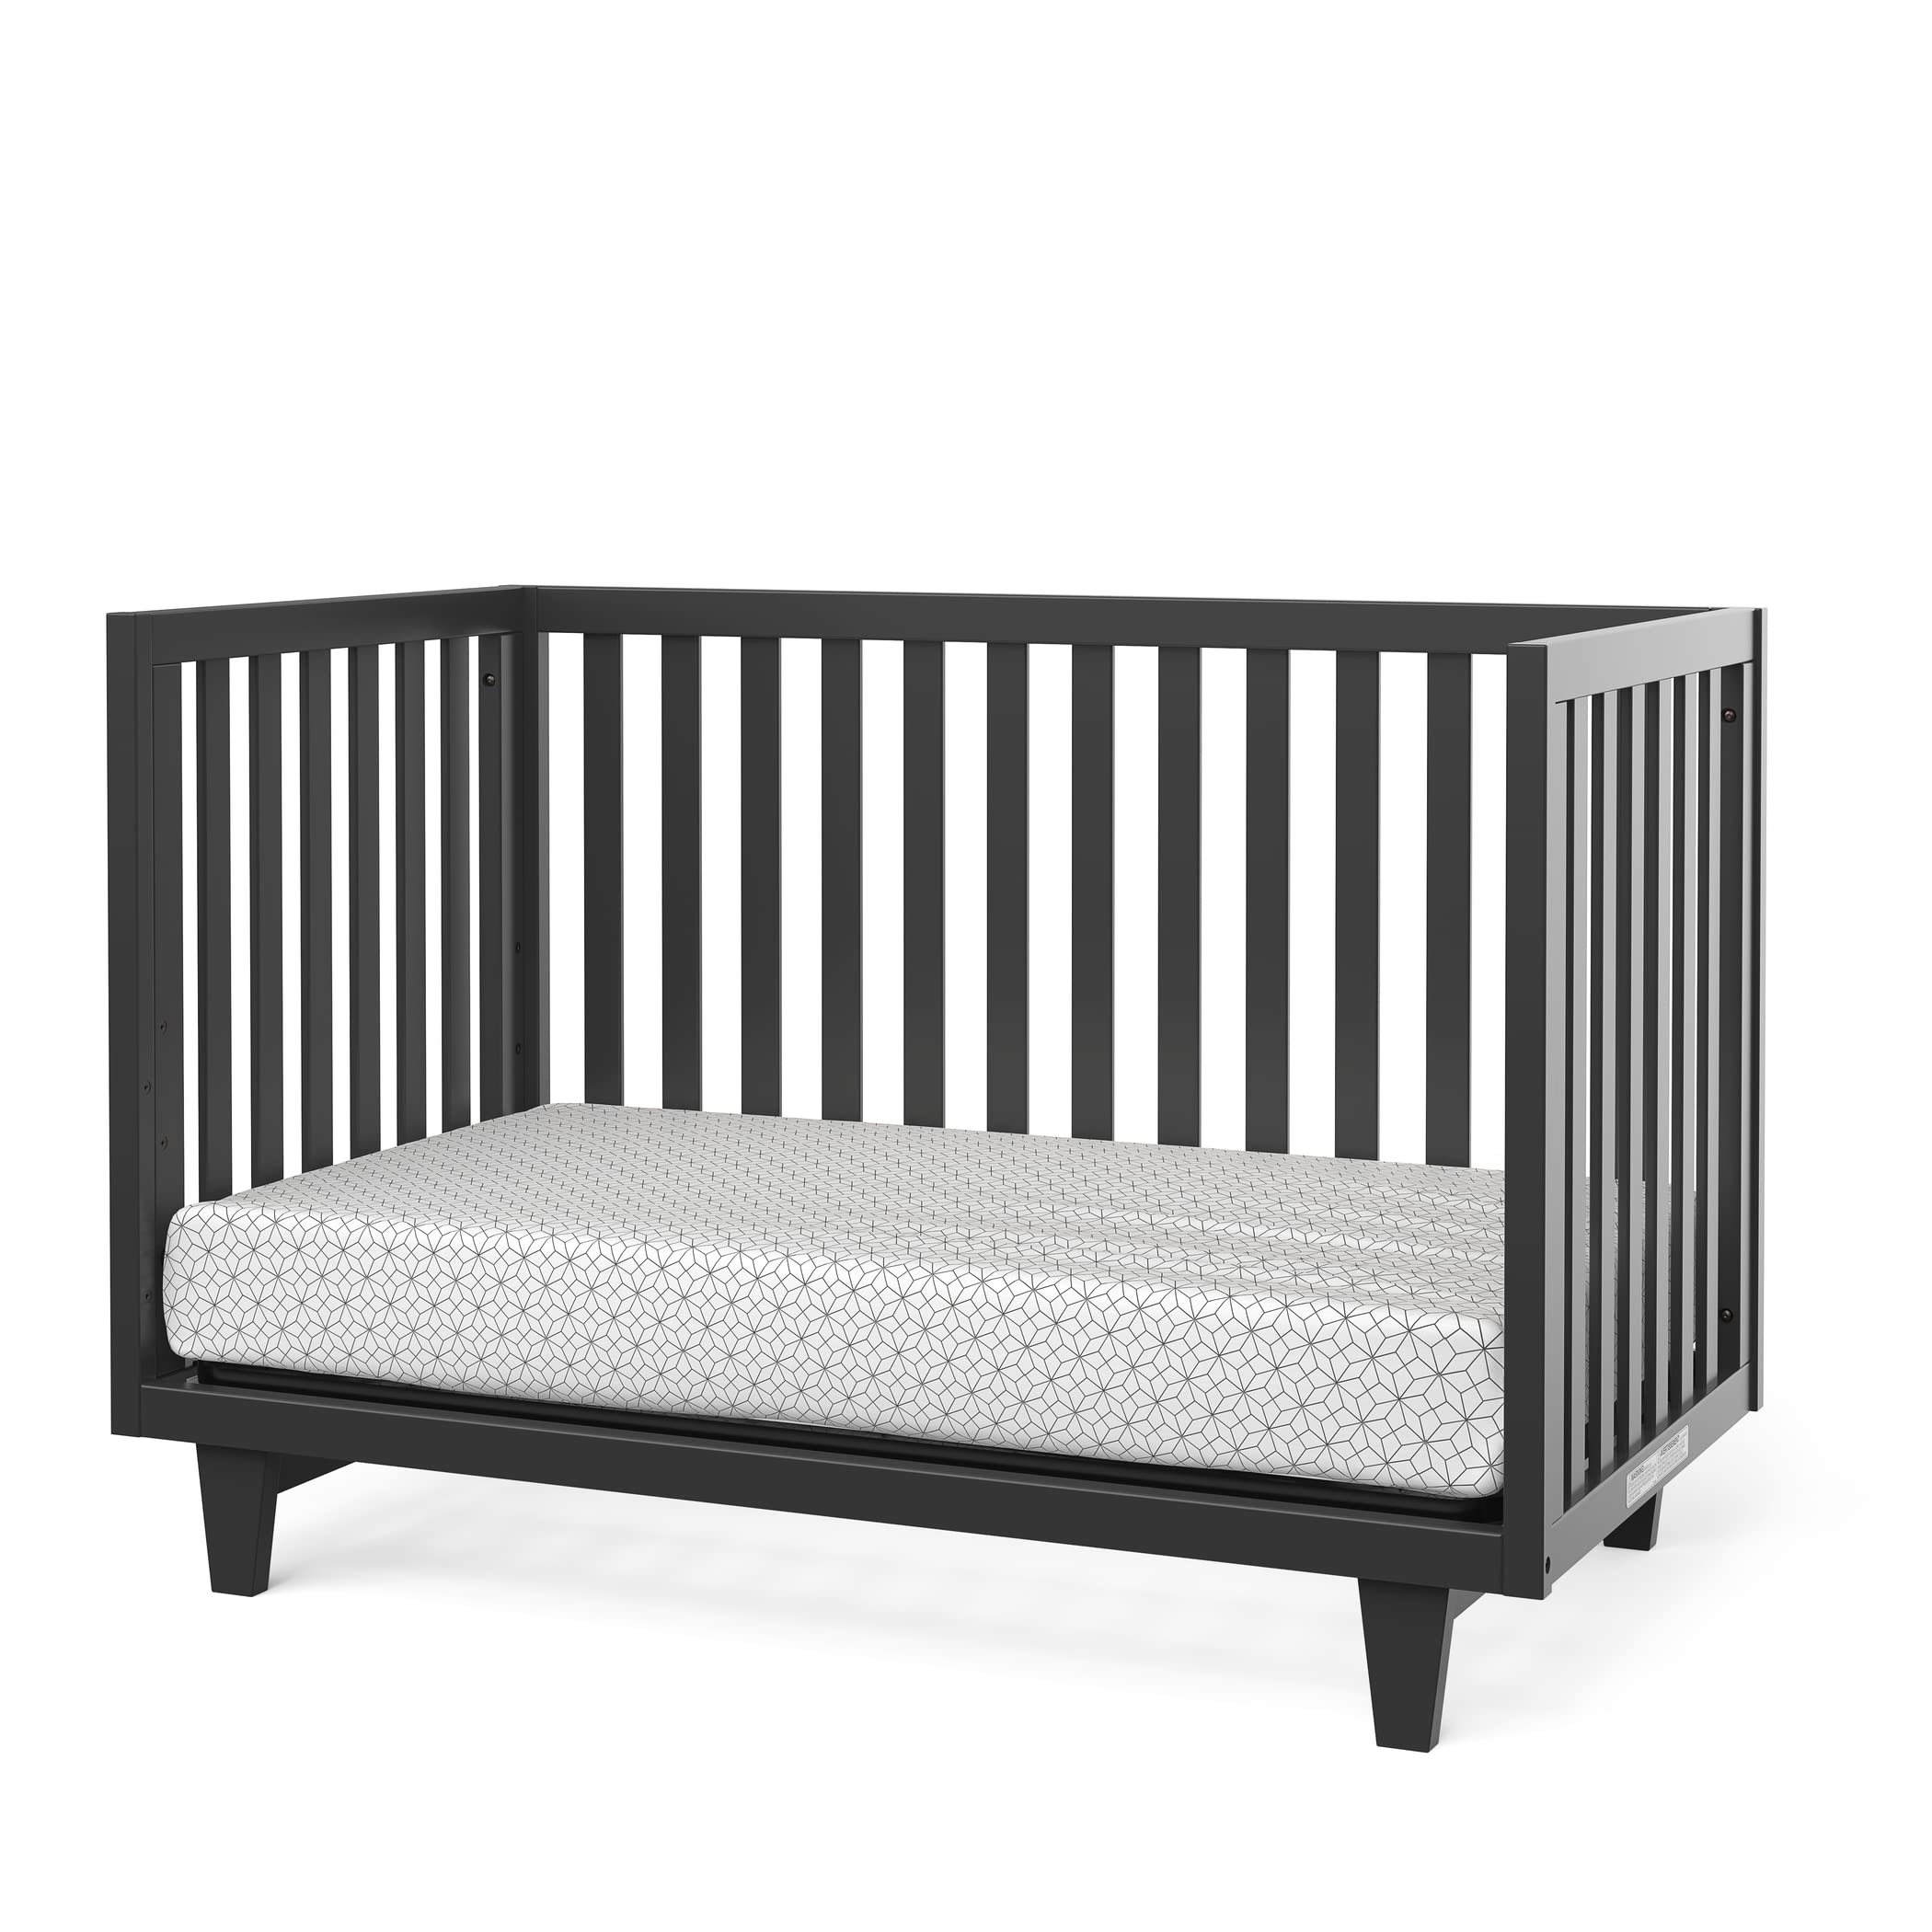 Child Craft Tremont 2 Piece Baby Nursery Set with 4 in 1 Convertible Crib and Changing Table Dresser (Ebony Black)